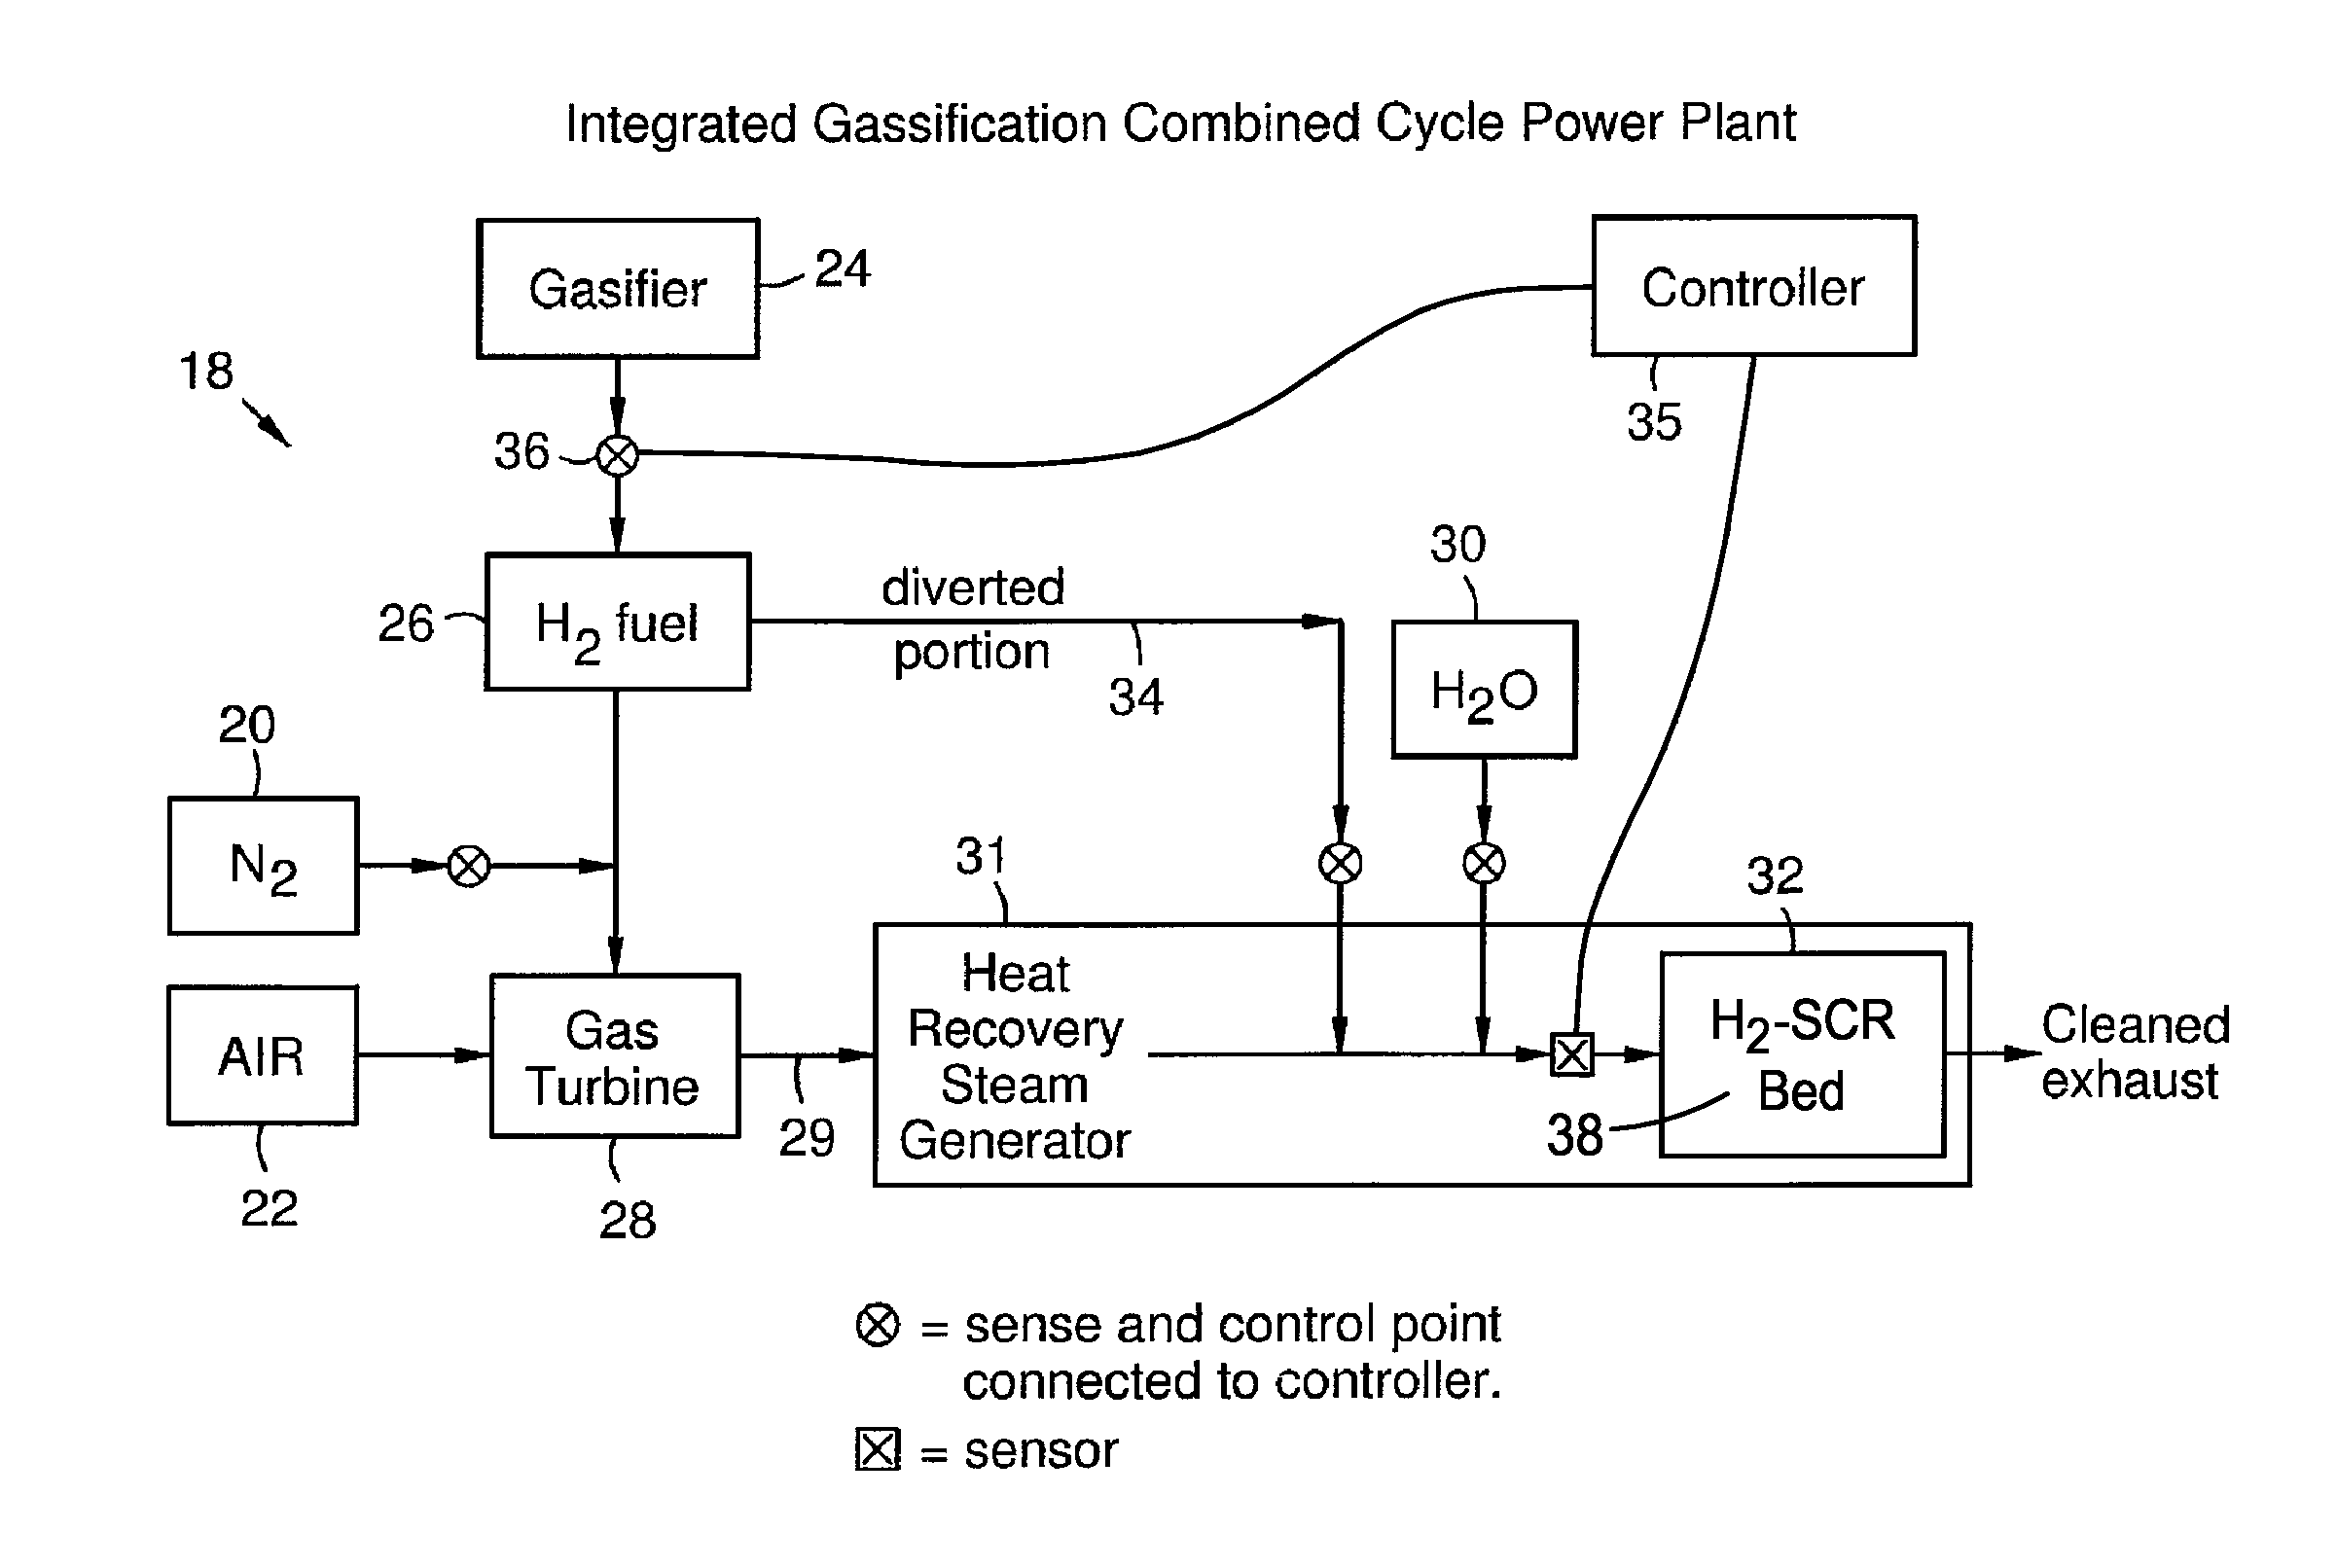 Selective catalytic reduction system and process for treating NOx emissions using a palladium and rhodium or ruthenium catalyst